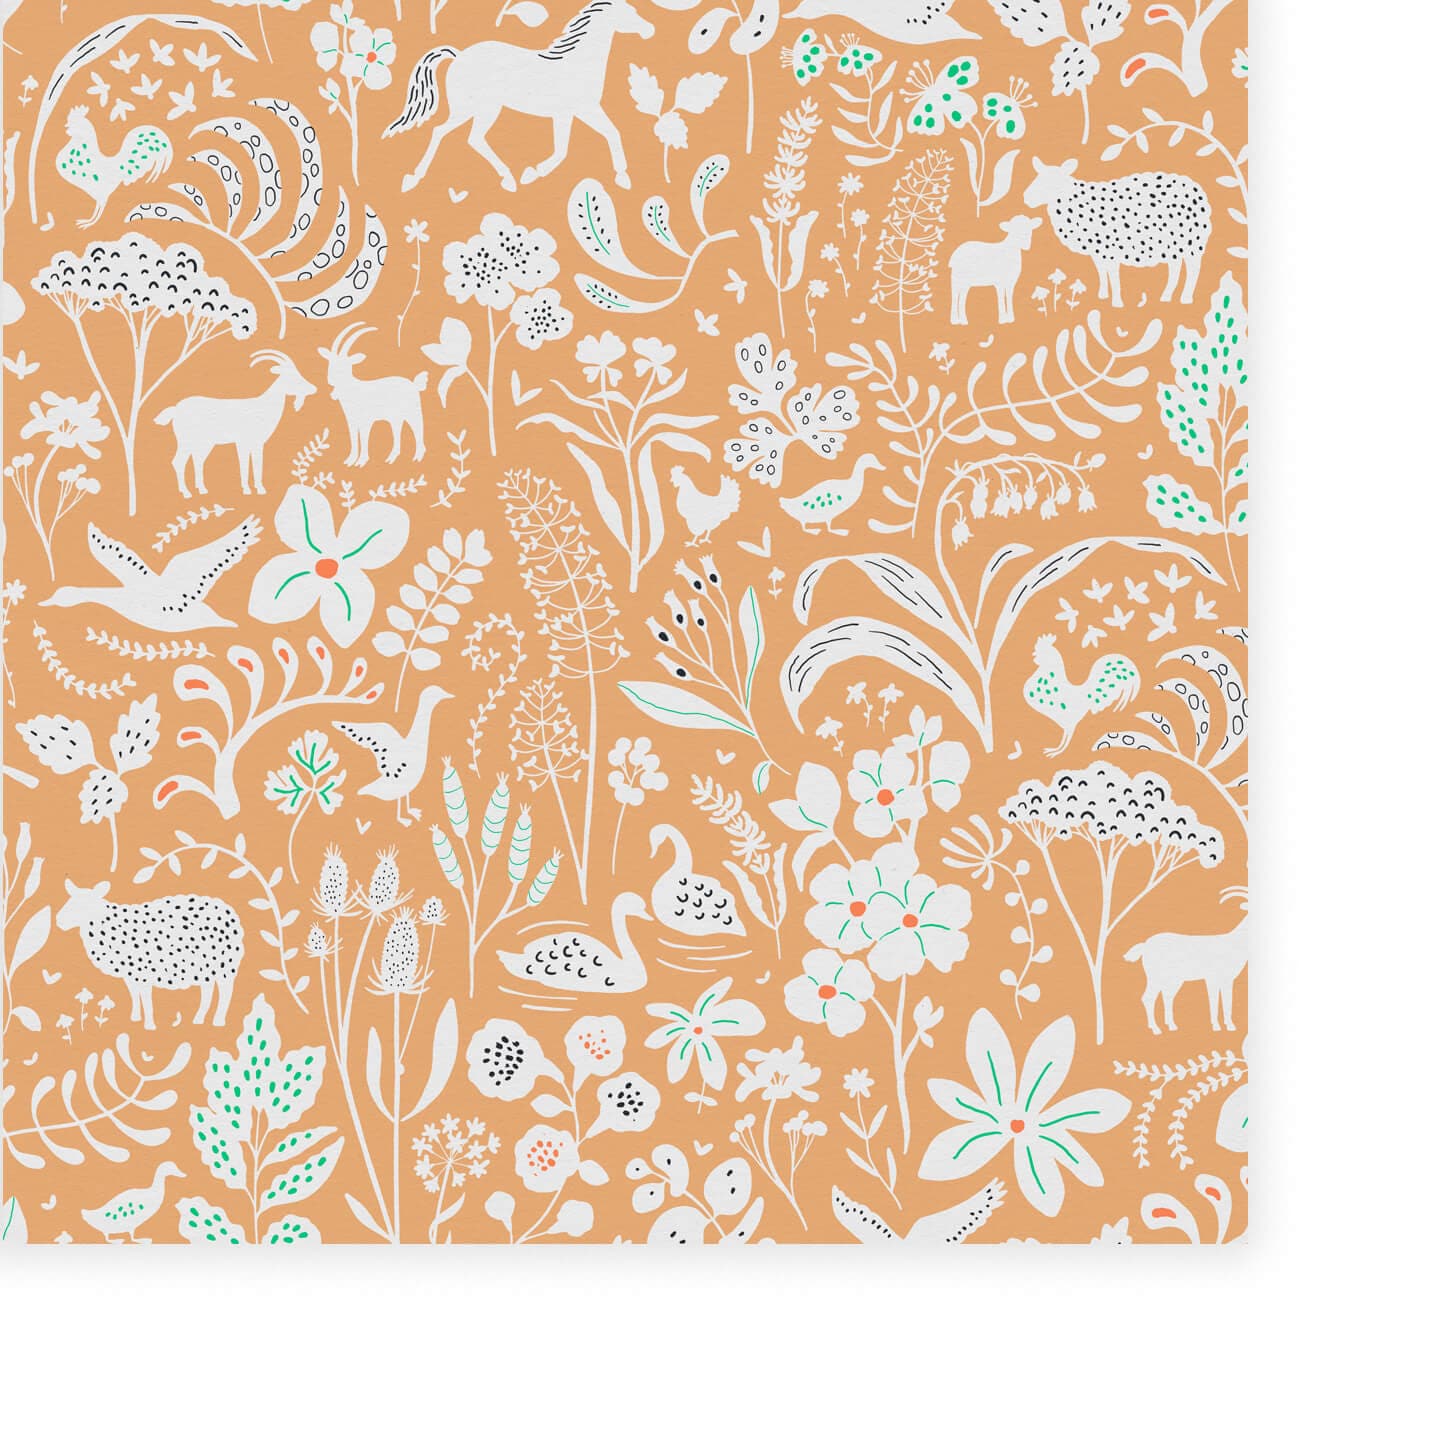 Wallpaper of white coloured flowers, leaves, swans, chickens, deers, ducks with a Ochre orange background.